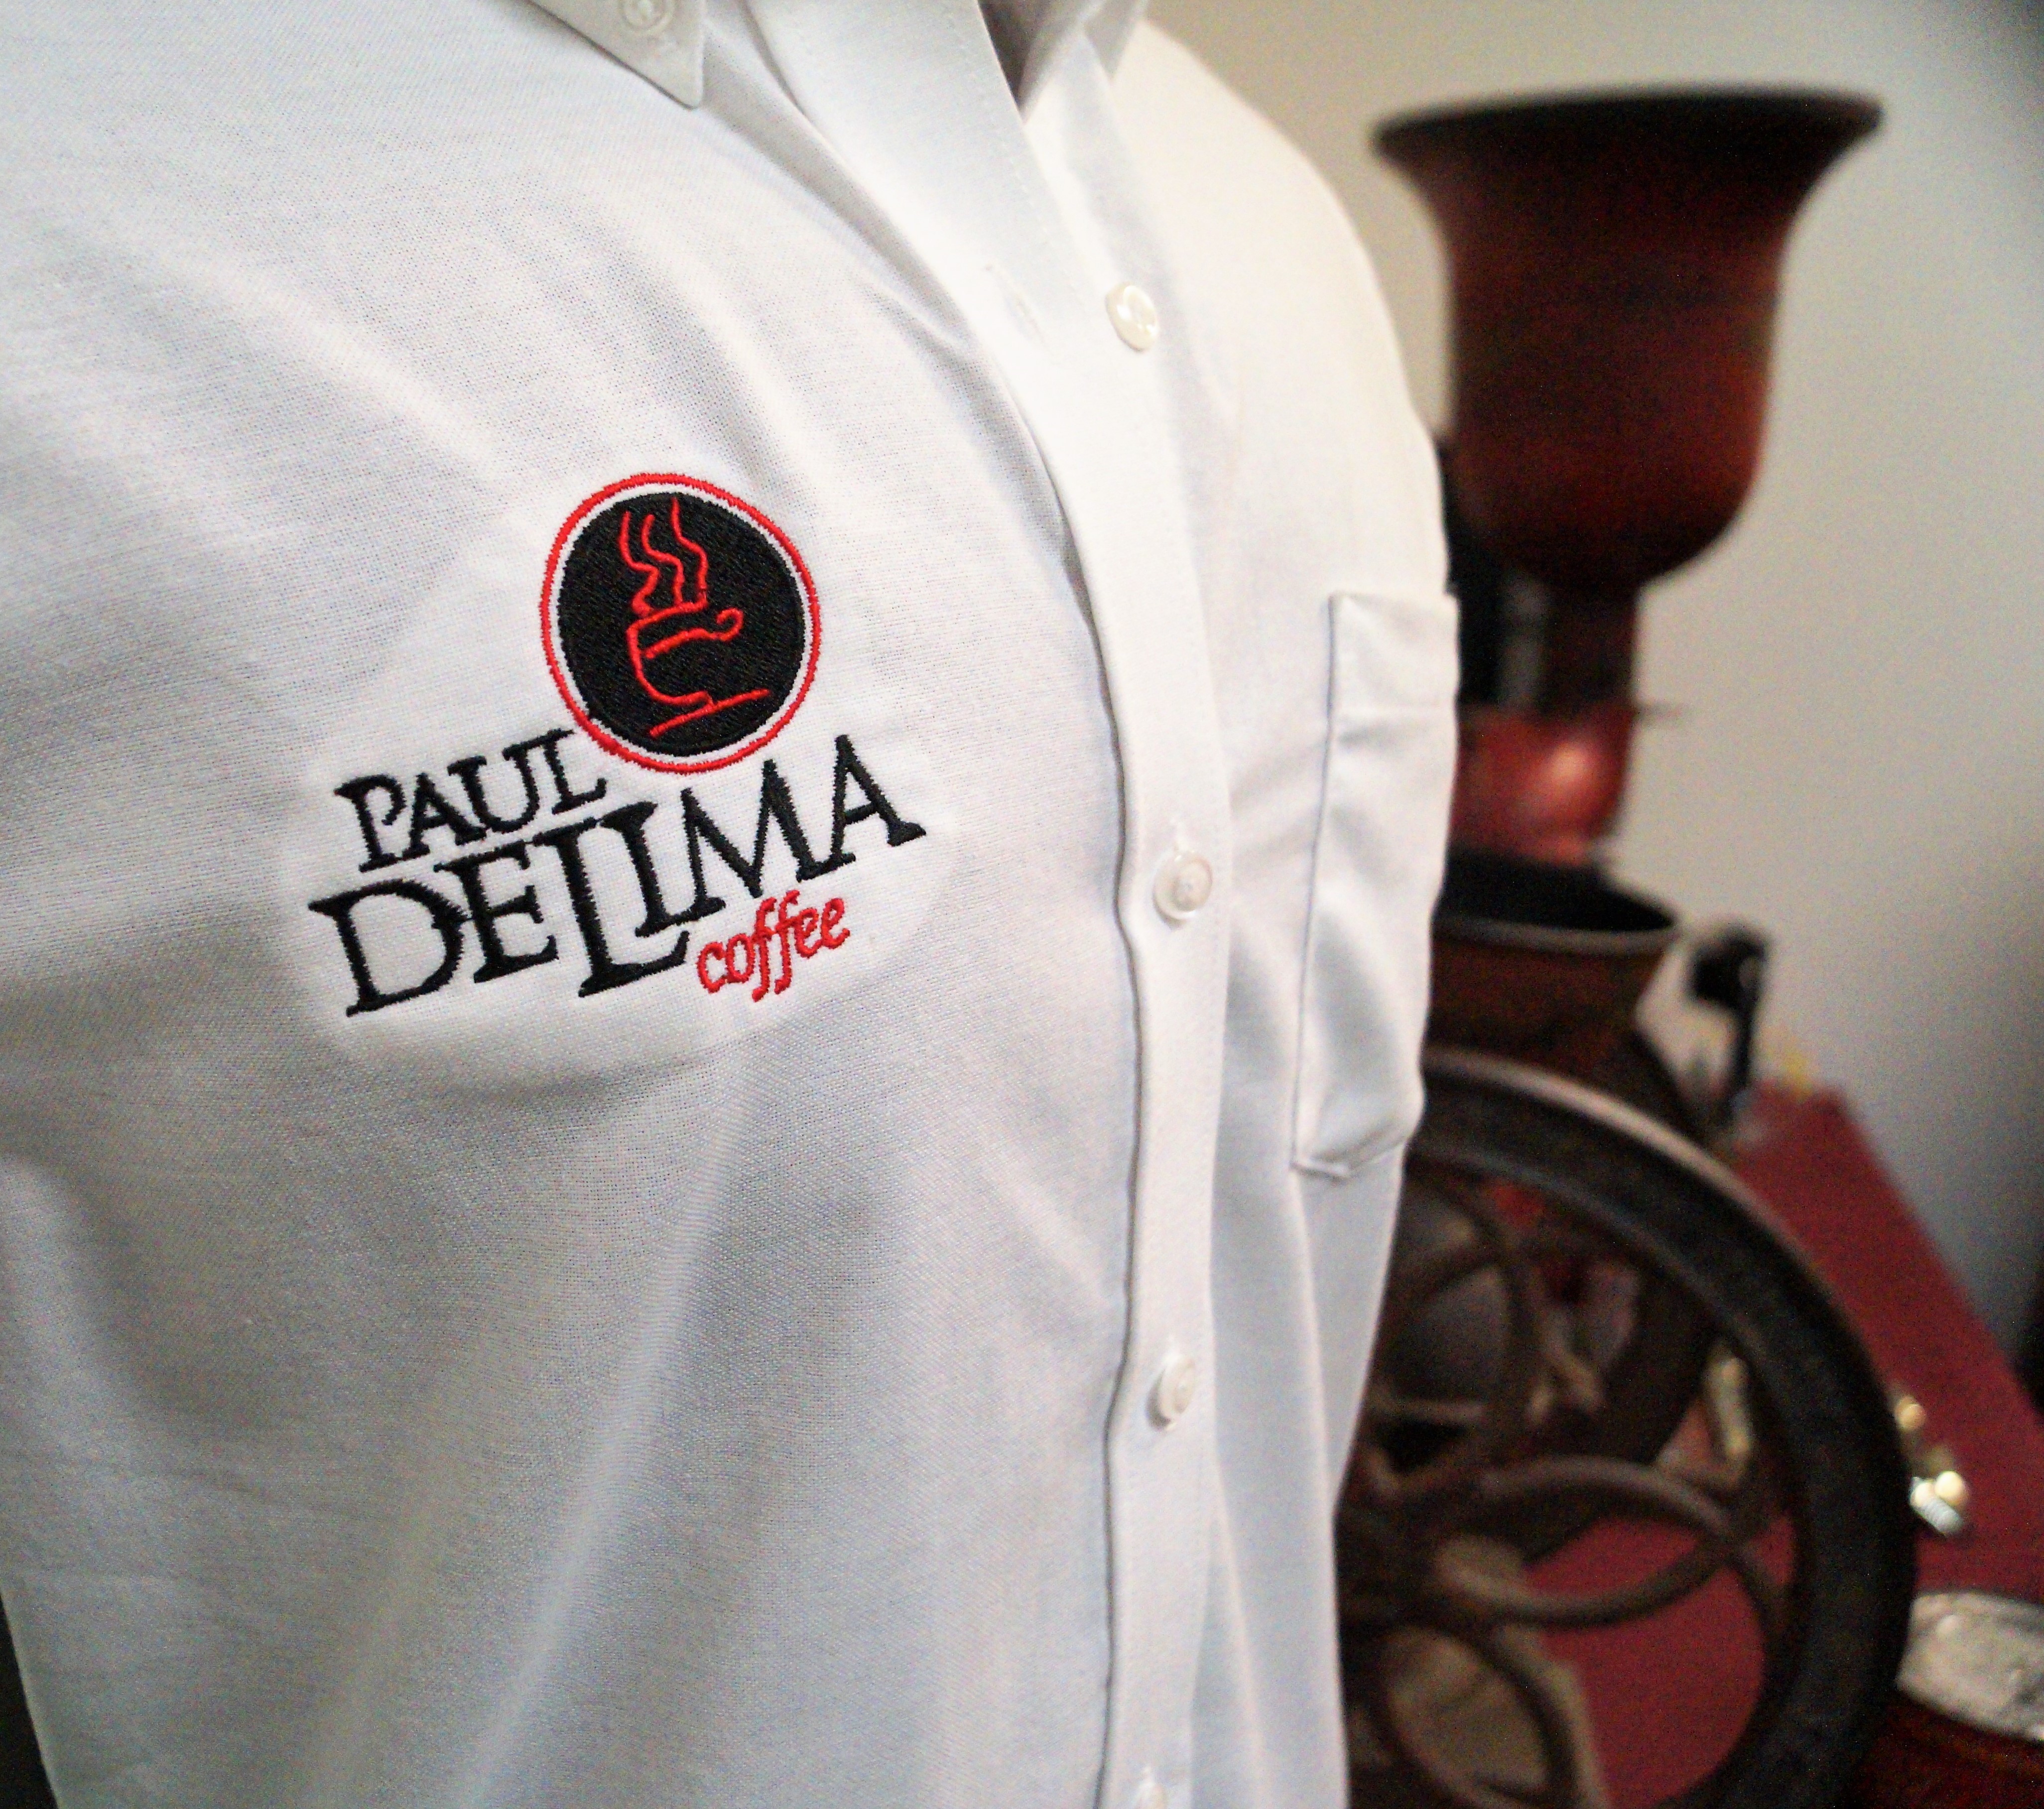 A Paul deLima shirt on display in the museum with old coffee grinding equipment in the background.